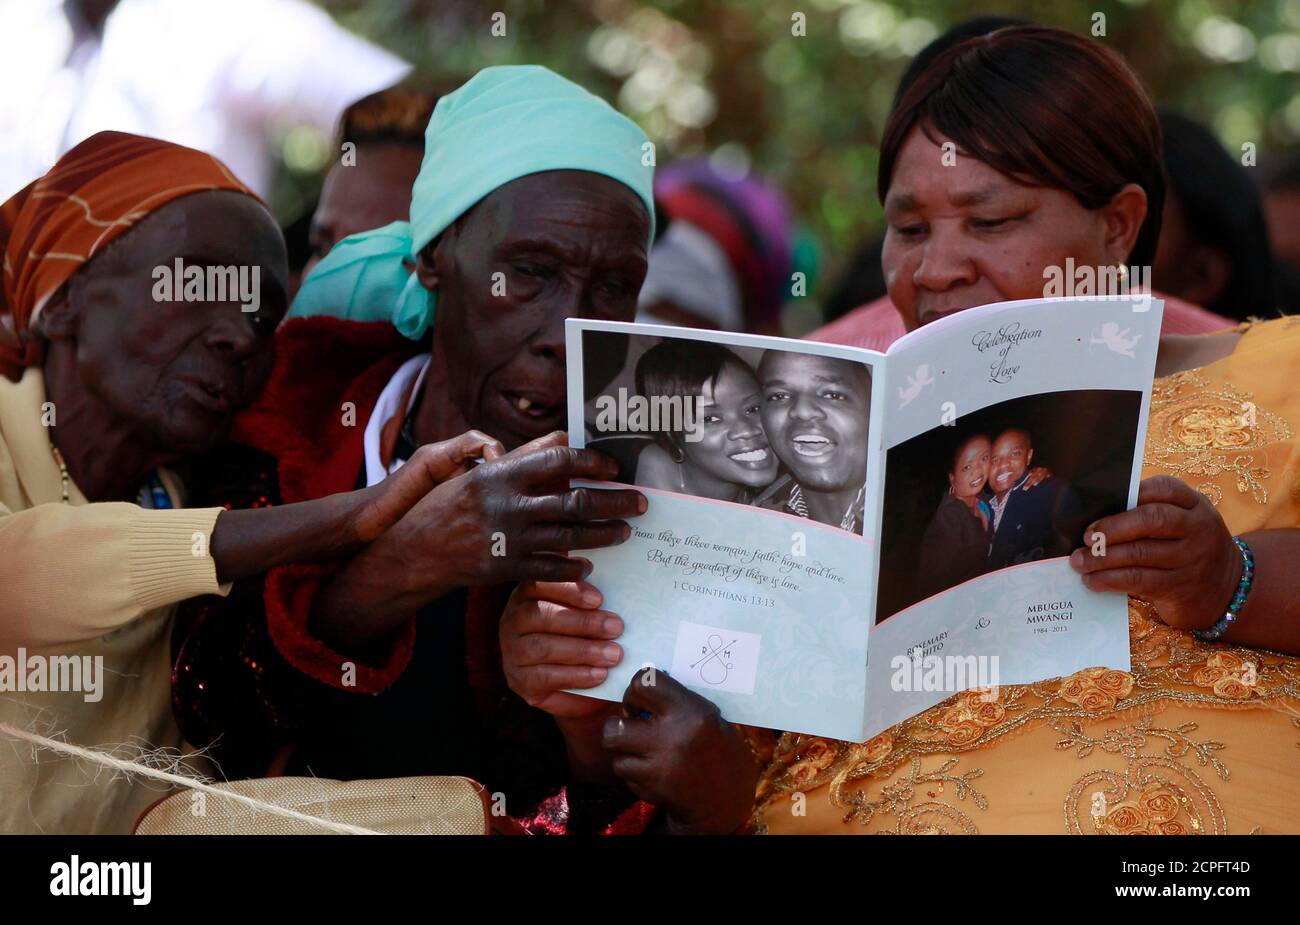 Villagers read the biography of Mbugua Maina and Maina's fiancee Rosemary Wahito, who were both killed during the Westgate Mall shopping mall attack, during their burial in Gatundu village near Nairobi, September 27, 2013. At least 72 people were killed in the attack which occurred over the weekend. REUTERS/Thomas Mukoya (KENYA - Tags: CIVIL UNREST CRIME LAW OBITUARY) Stock Photo